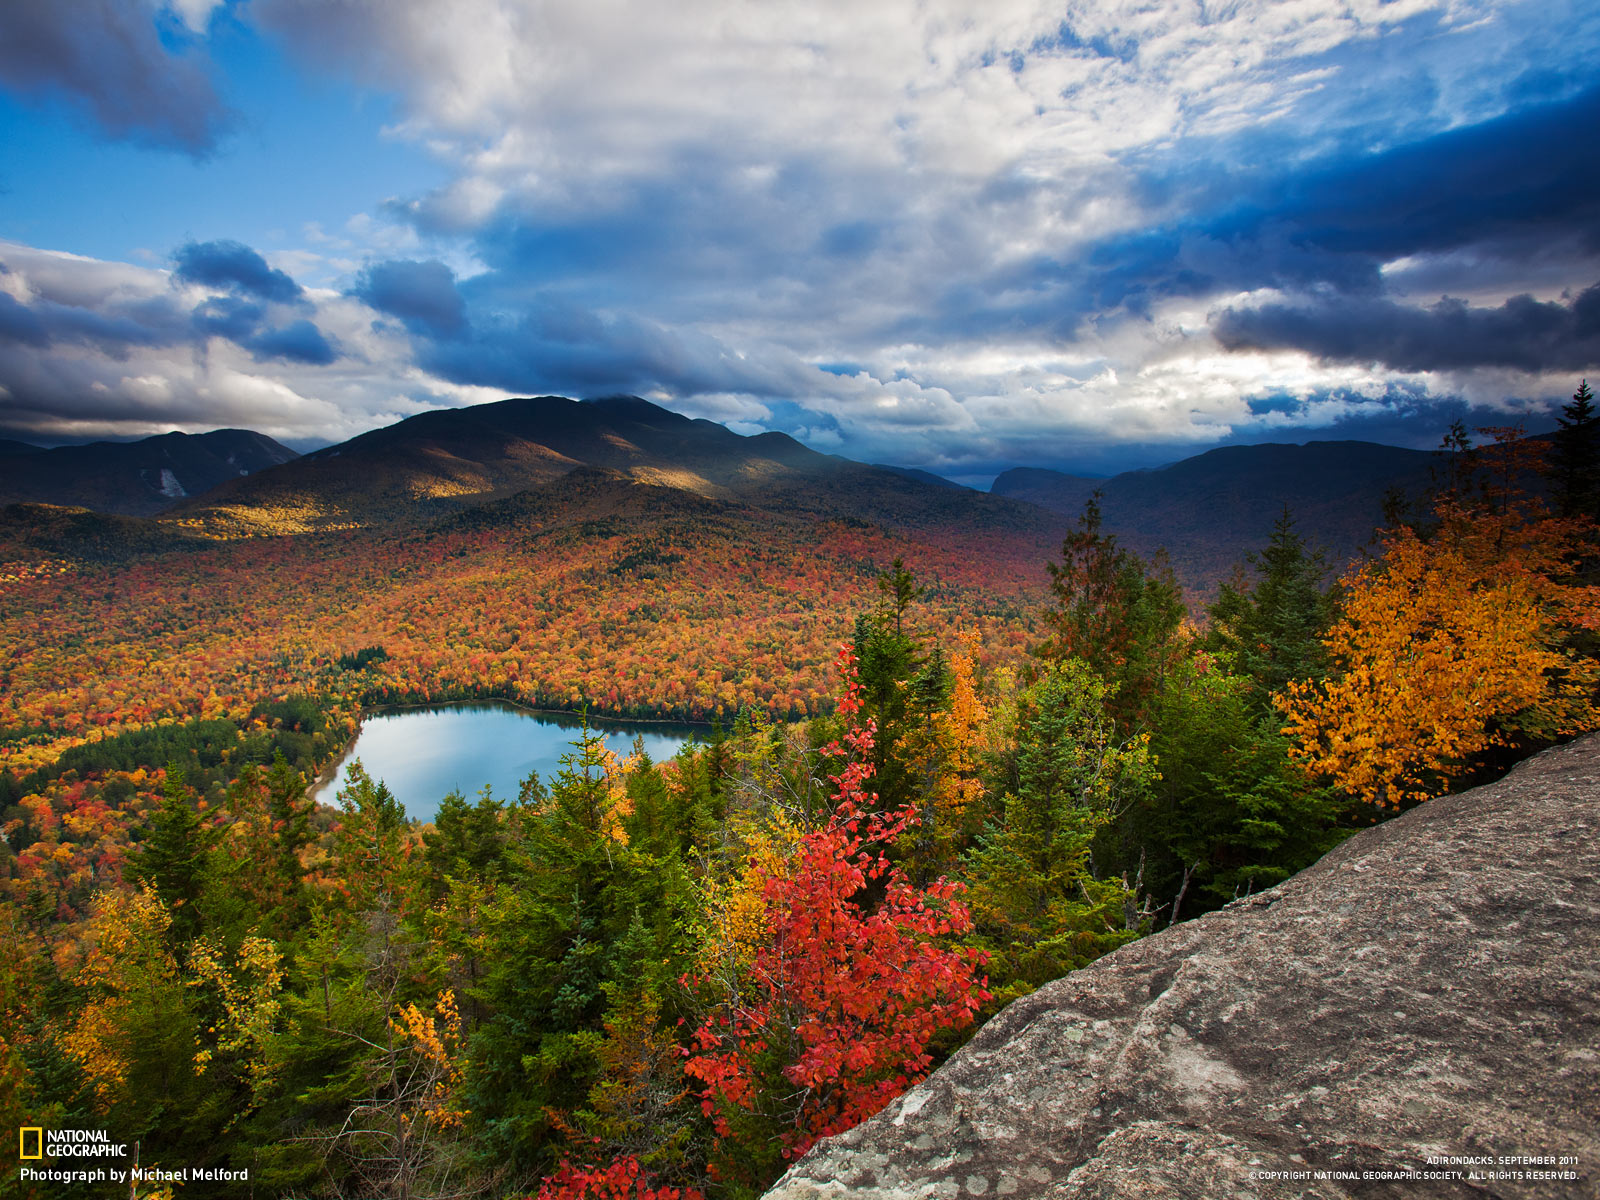 Adirondack Park Photo Gallery Pictures More From